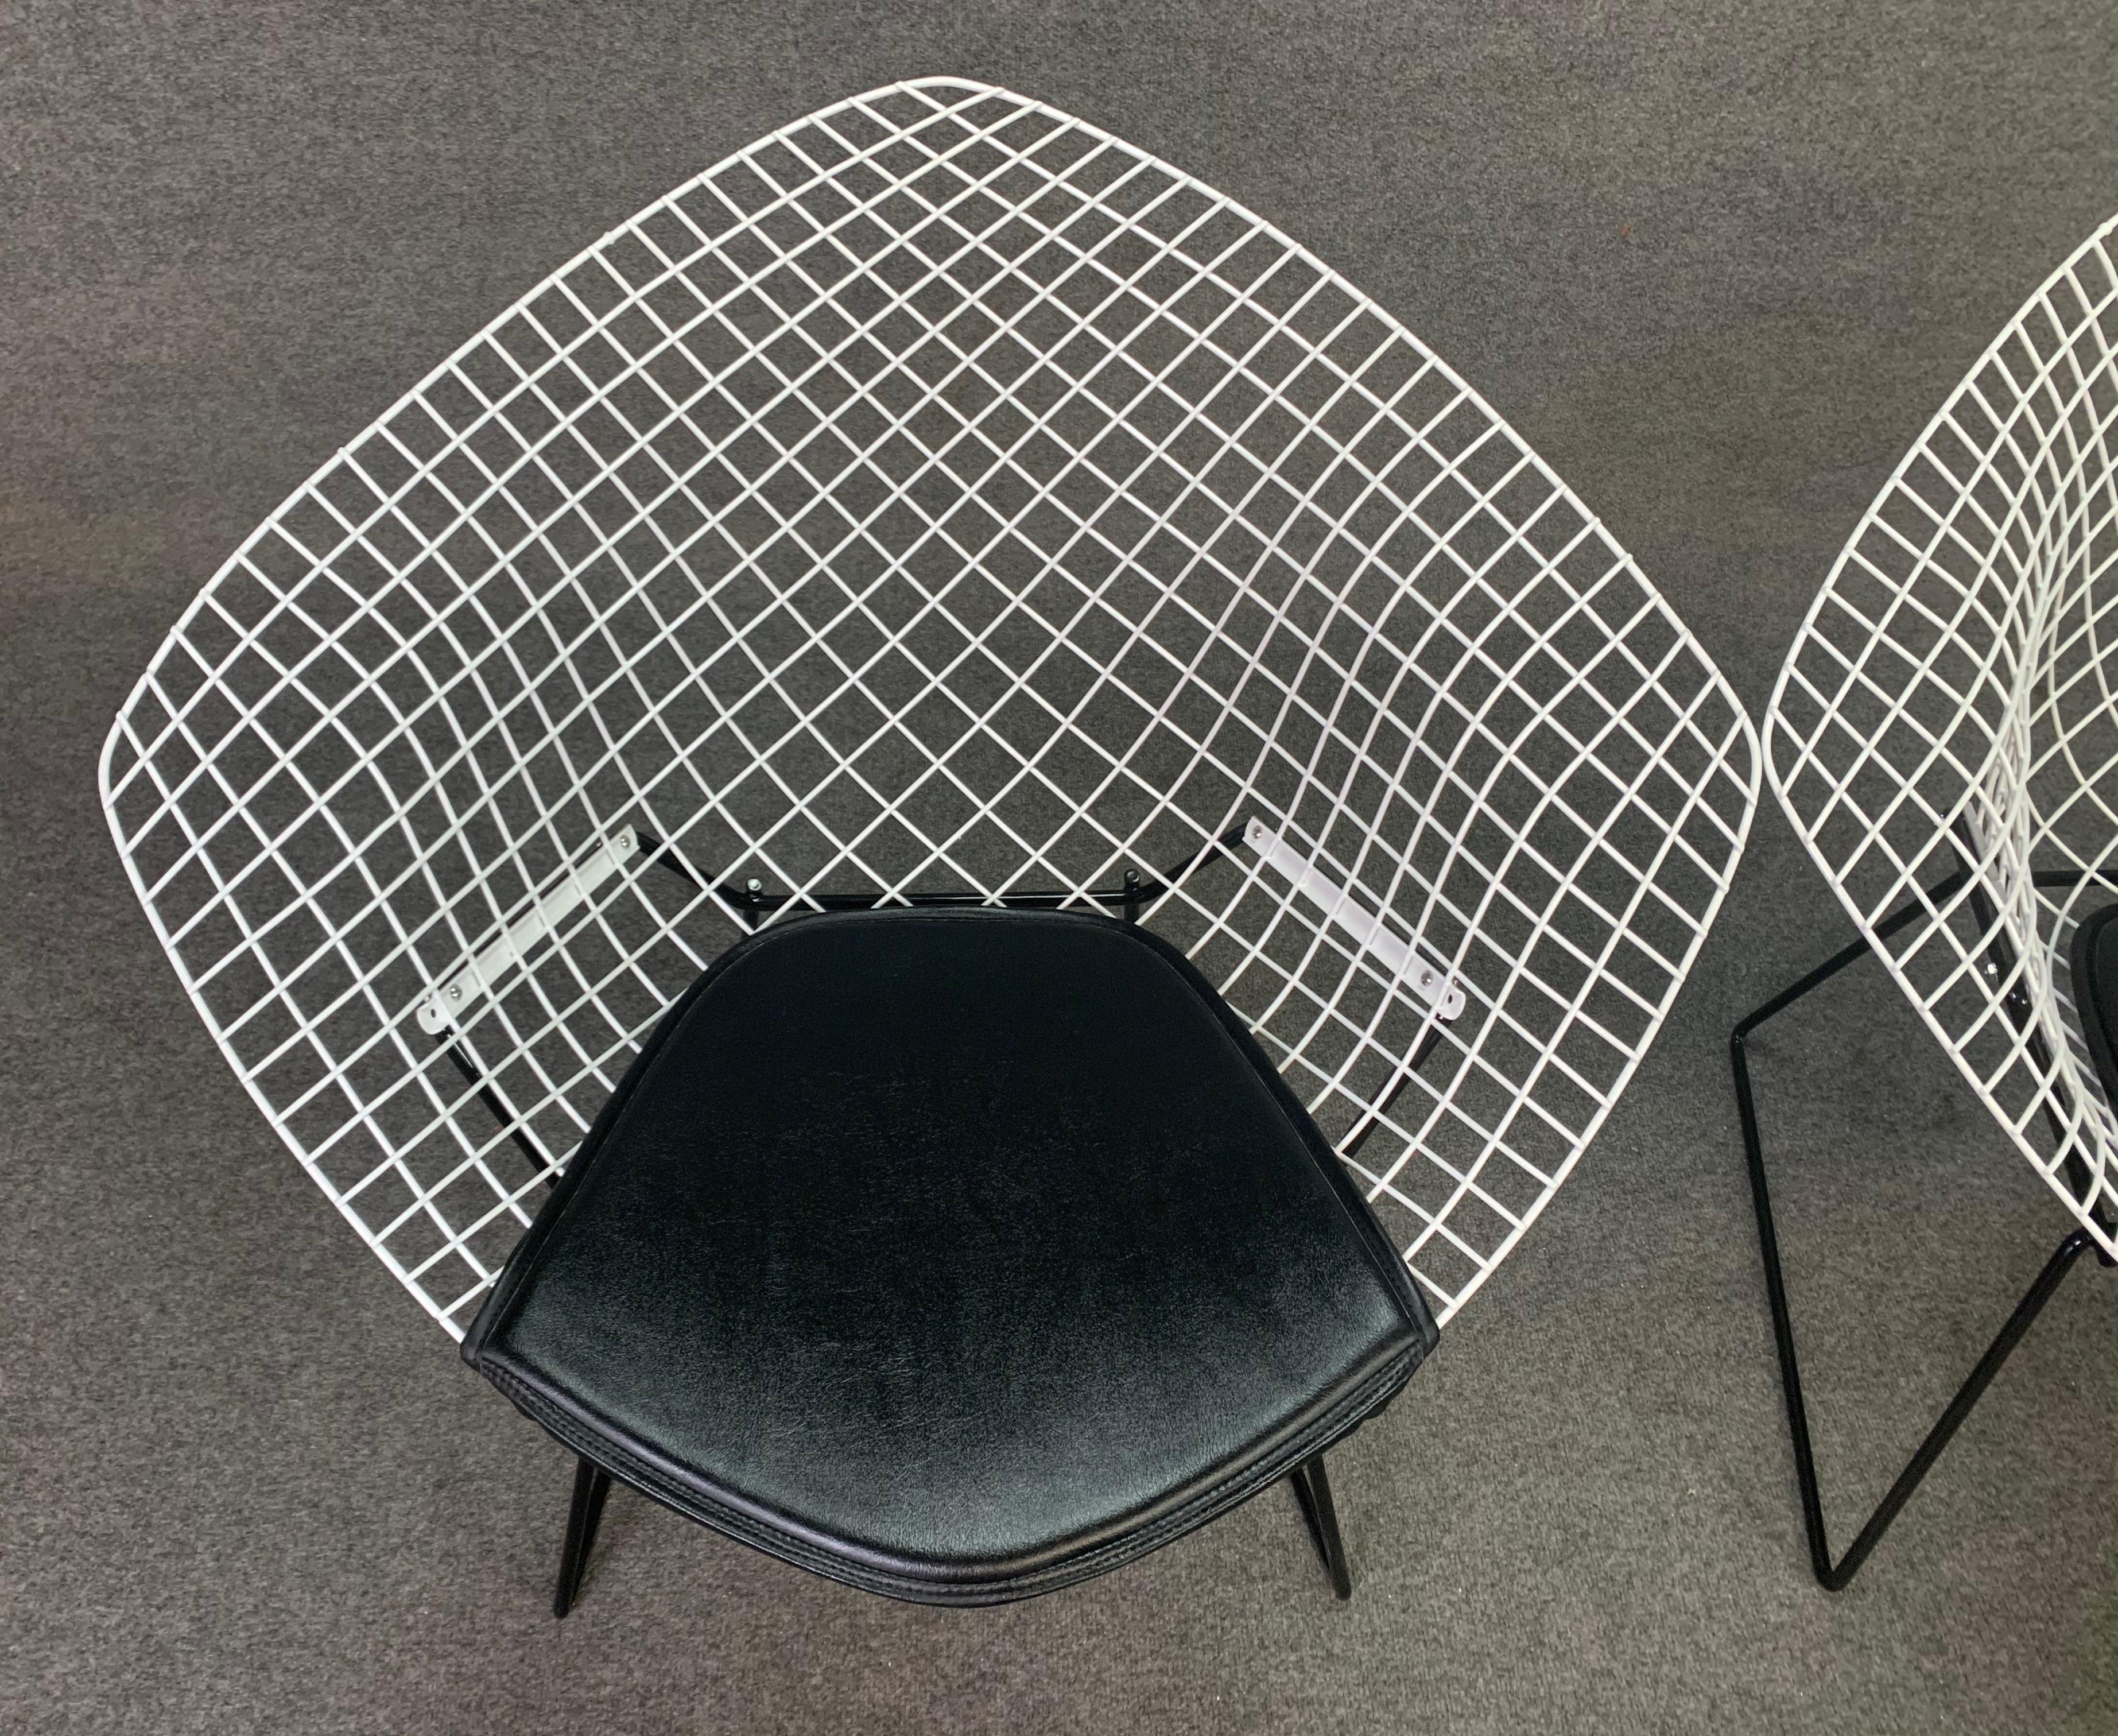 Welded Pair of Vintage Mid-Century Modern Diamond Chairs by Harry Bertoia for Knoll